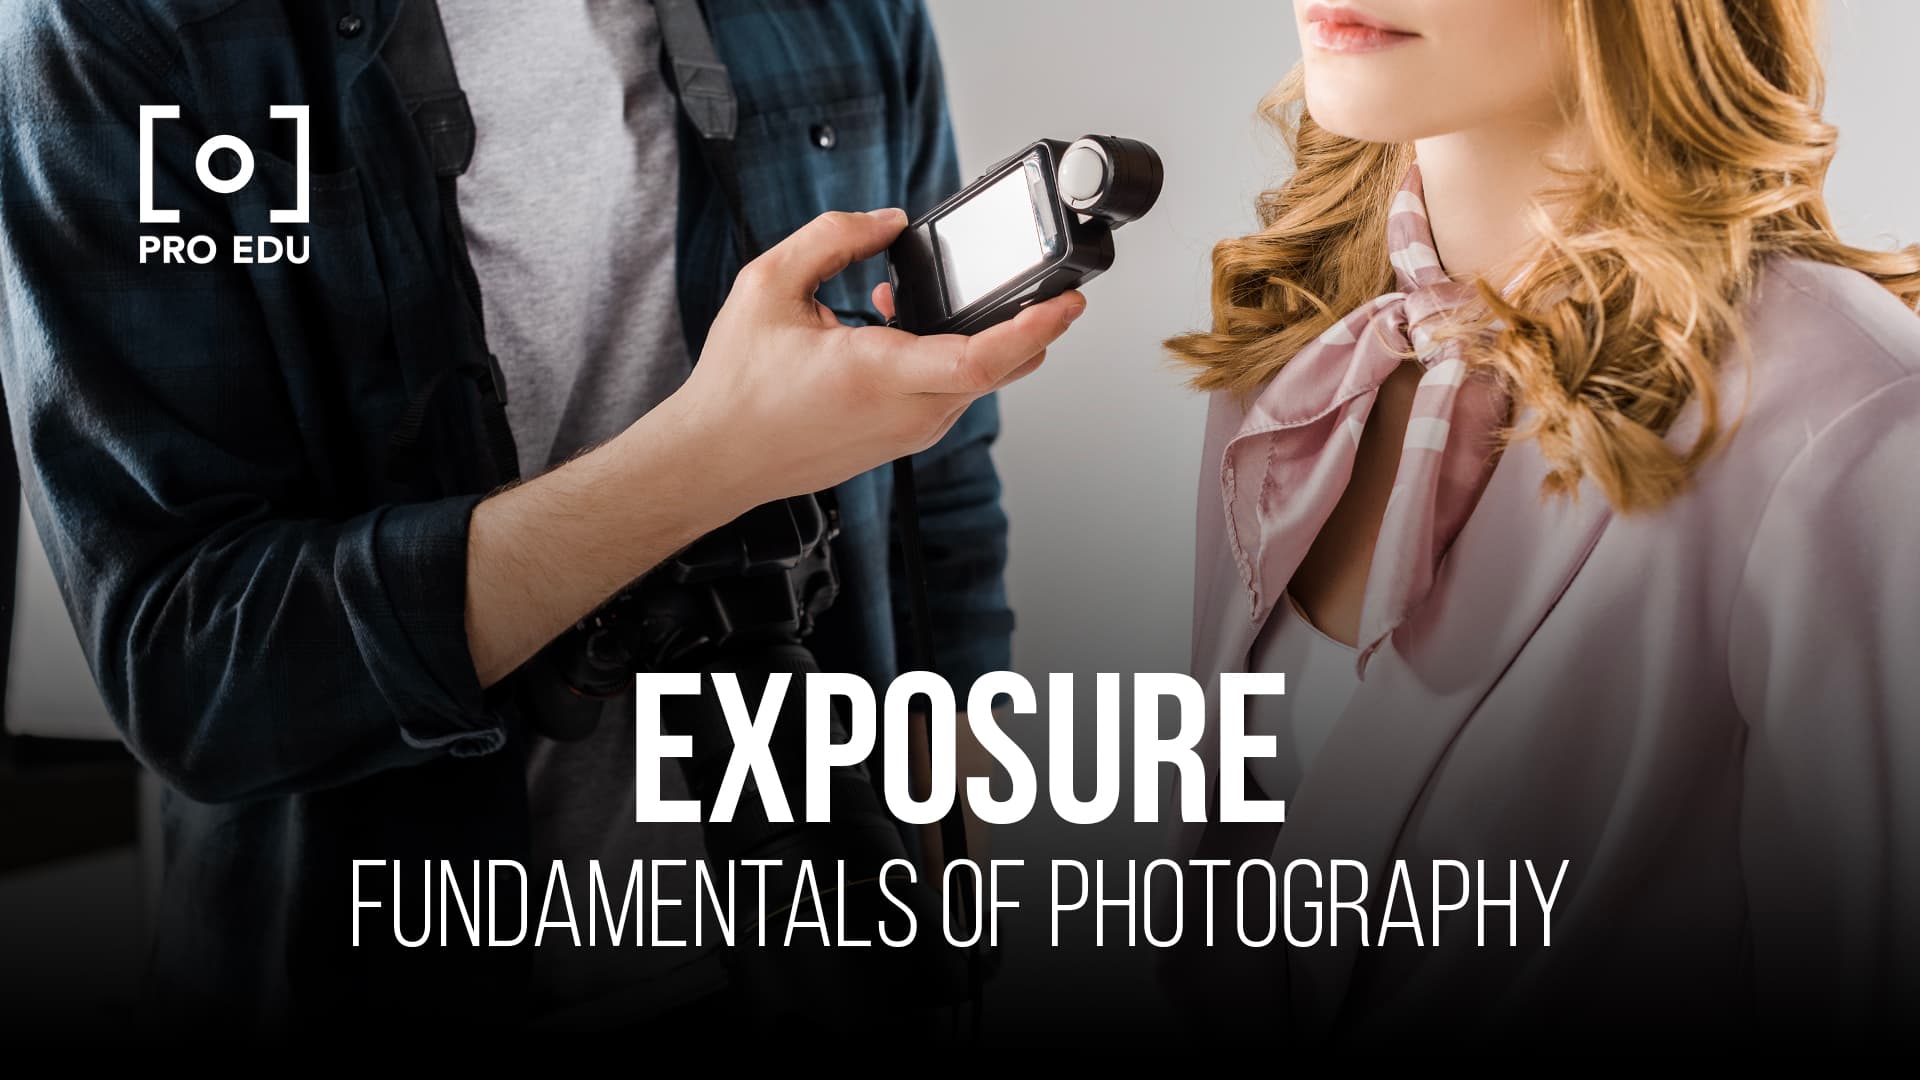 Basics of exposure for beginners in photography, understanding the fundamentals